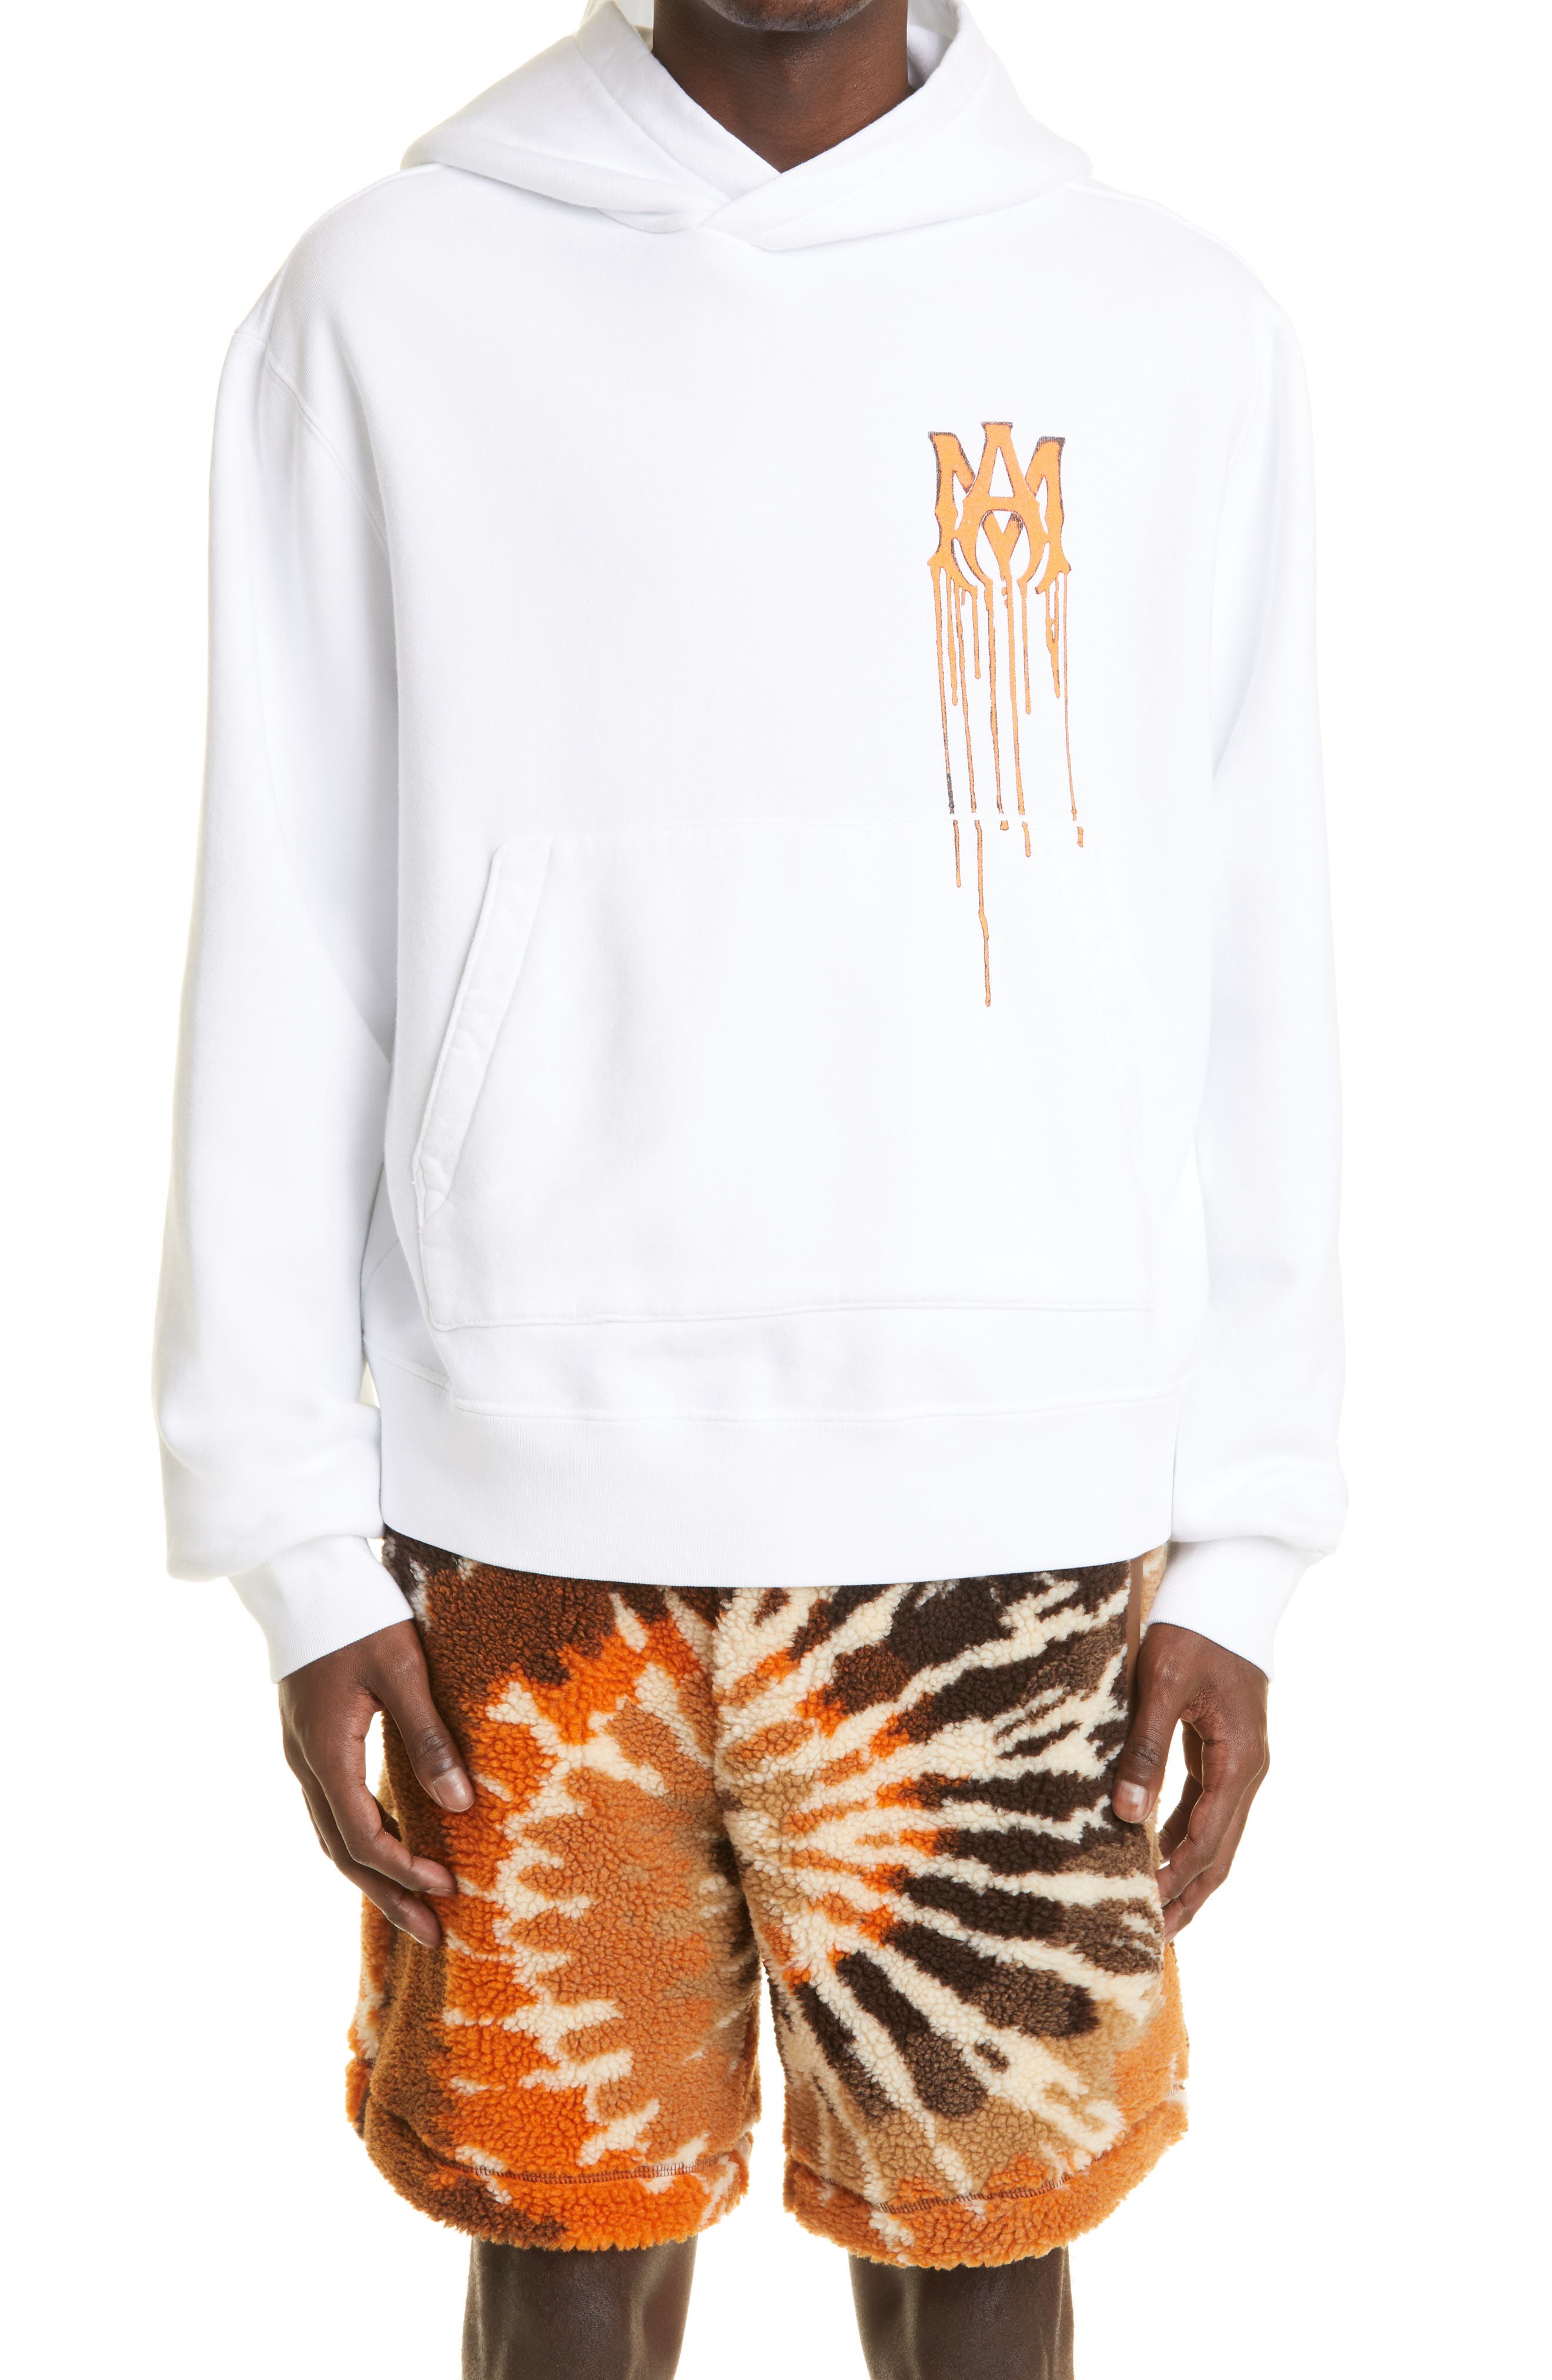 AMIRI Paint Drip M.A. Pullover Hoodie in White /Orange at Nordstrom, Size Large